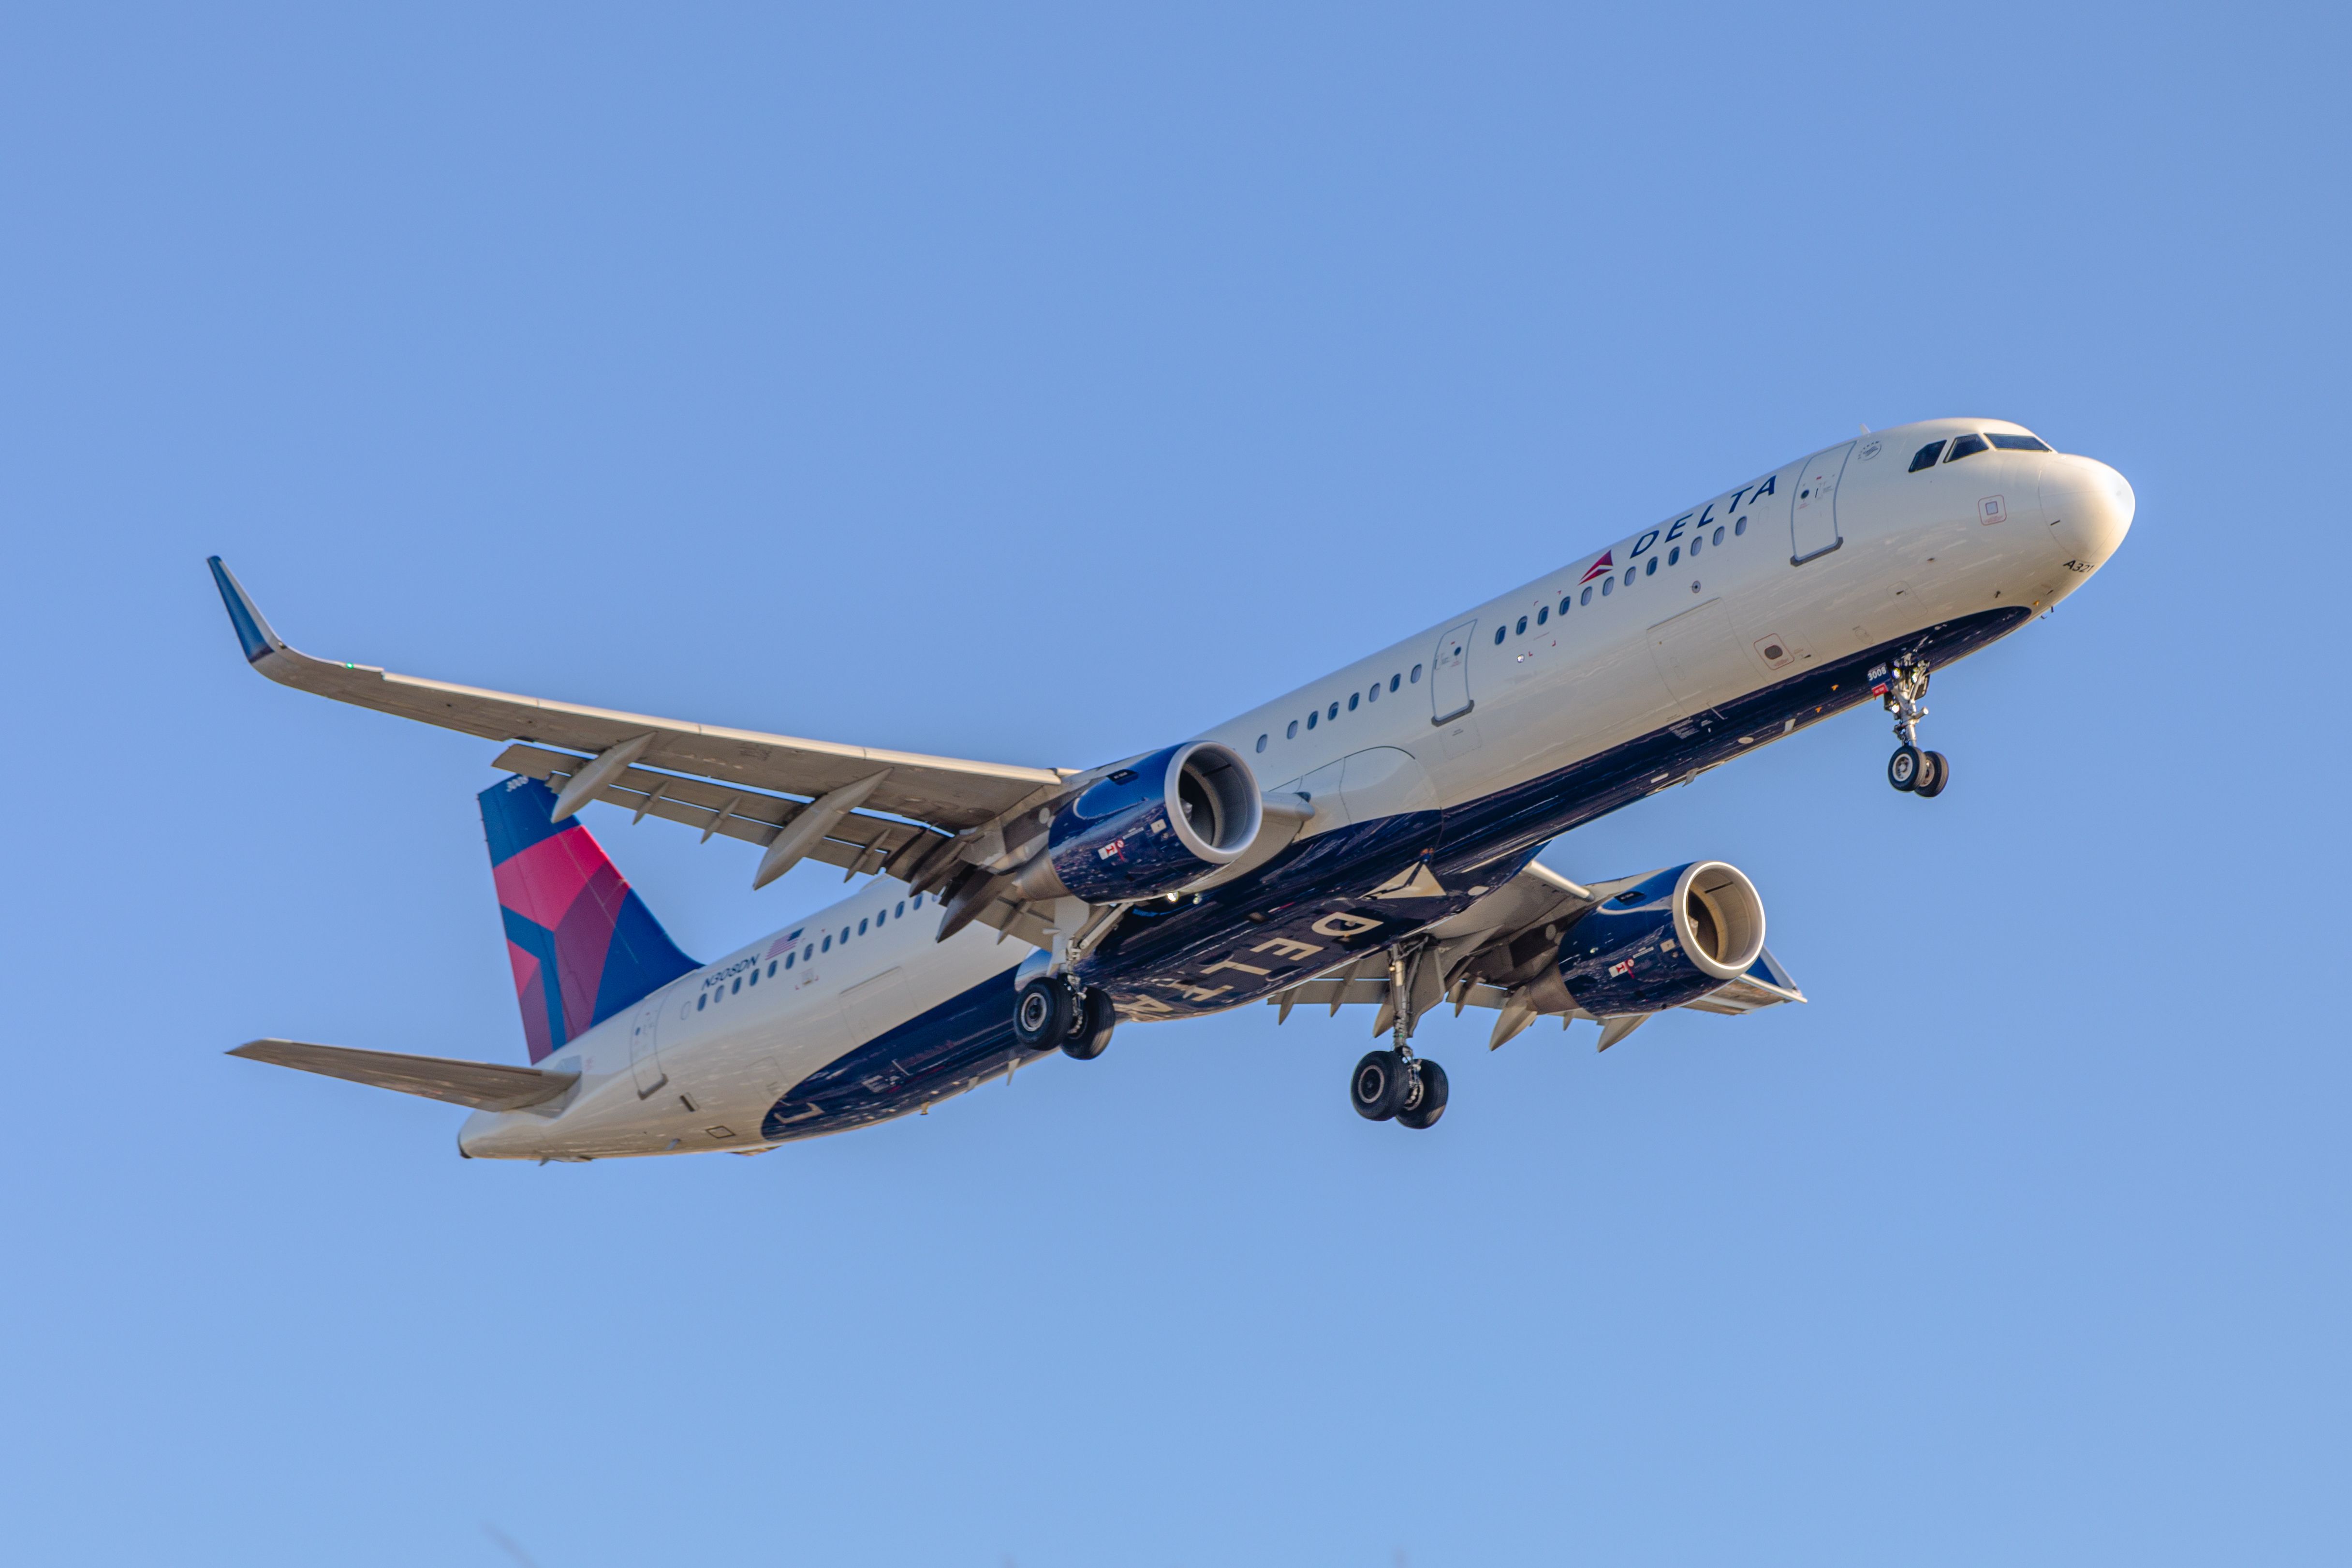  Delta Air Lines Airbus A321 landing at Los Angeles International Airport.